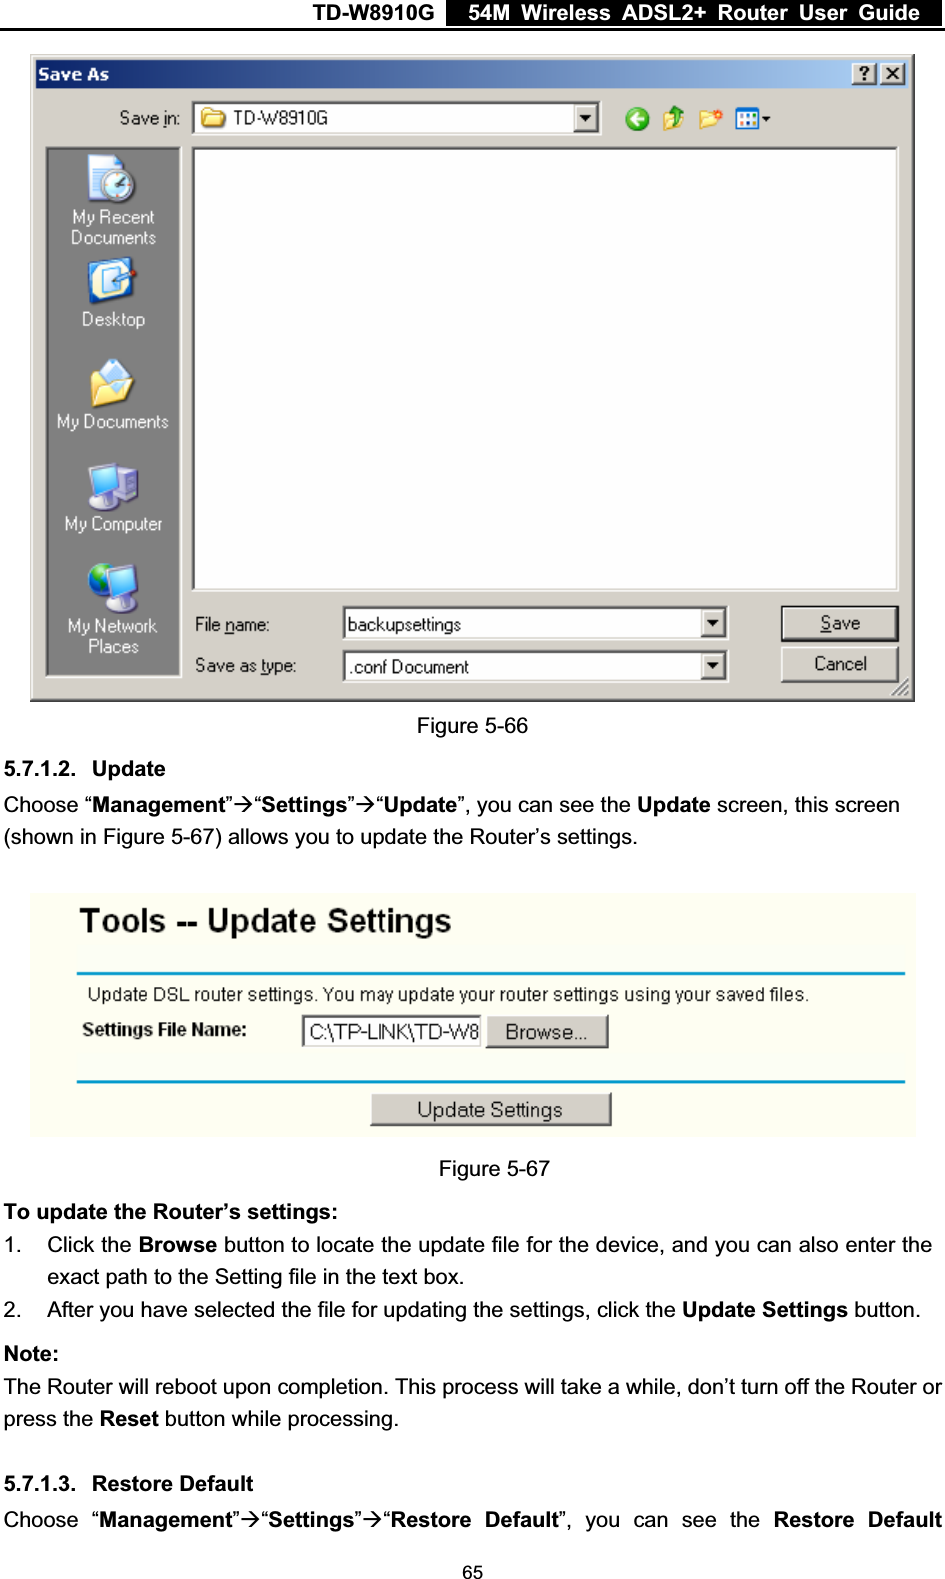 TD-W8910G    54M Wireless ADSL2+ Router User Guide  Figure 5-66 5.7.1.2. UpdateChoose “Management”Æ“Settings”Æ“Update”, you can see the Update screen, this screen (shown in Figure 5-67) allows you to update the Router’s settings. Figure 5-67 To update the Router’s settings: 1. Click the Browse button to locate the update file for the device, and you can also enter the exact path to the Setting file in the text box. 2.  After you have selected the file for updating the settings, click the Update Settings button. Note:The Router will reboot upon completion. This process will take a while, don’t turn off the Router or press the Reset button while processing. 5.7.1.3. Restore Default Choose “Management”Æ“Settings”Æ“Restore Default”, you can see the Restore Default 65